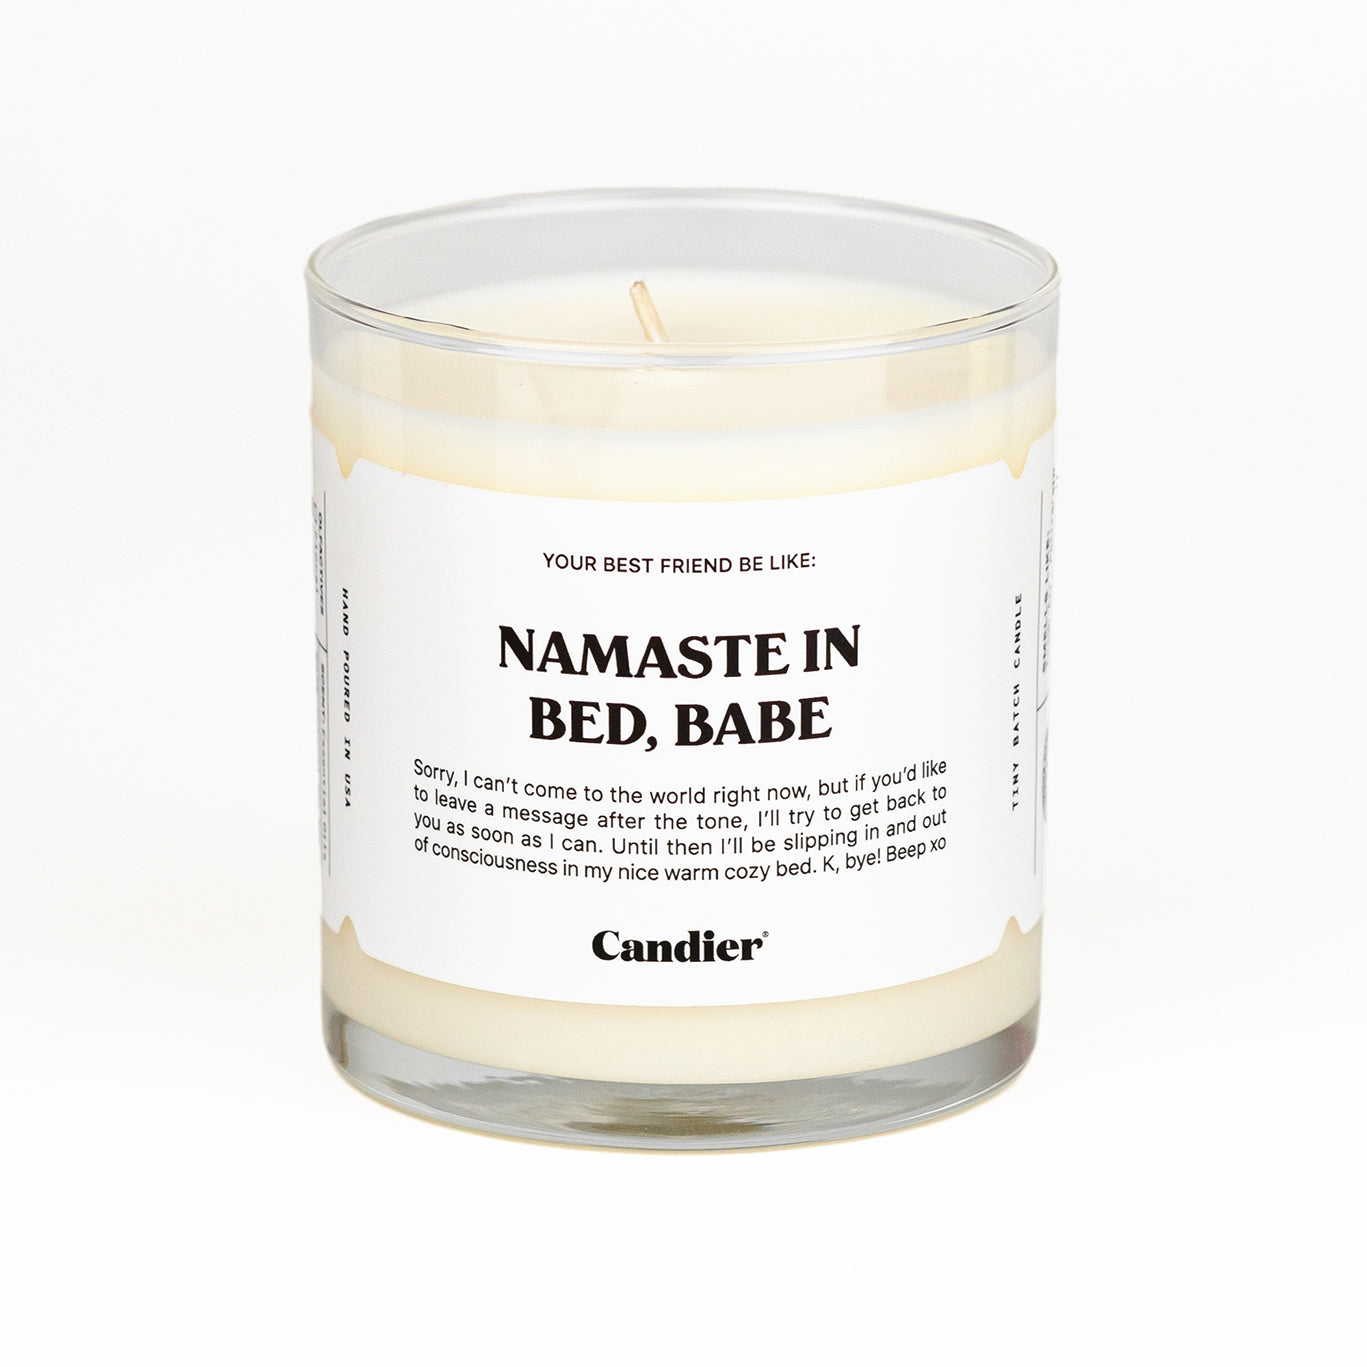 Namaste in Bed, Babe Candle